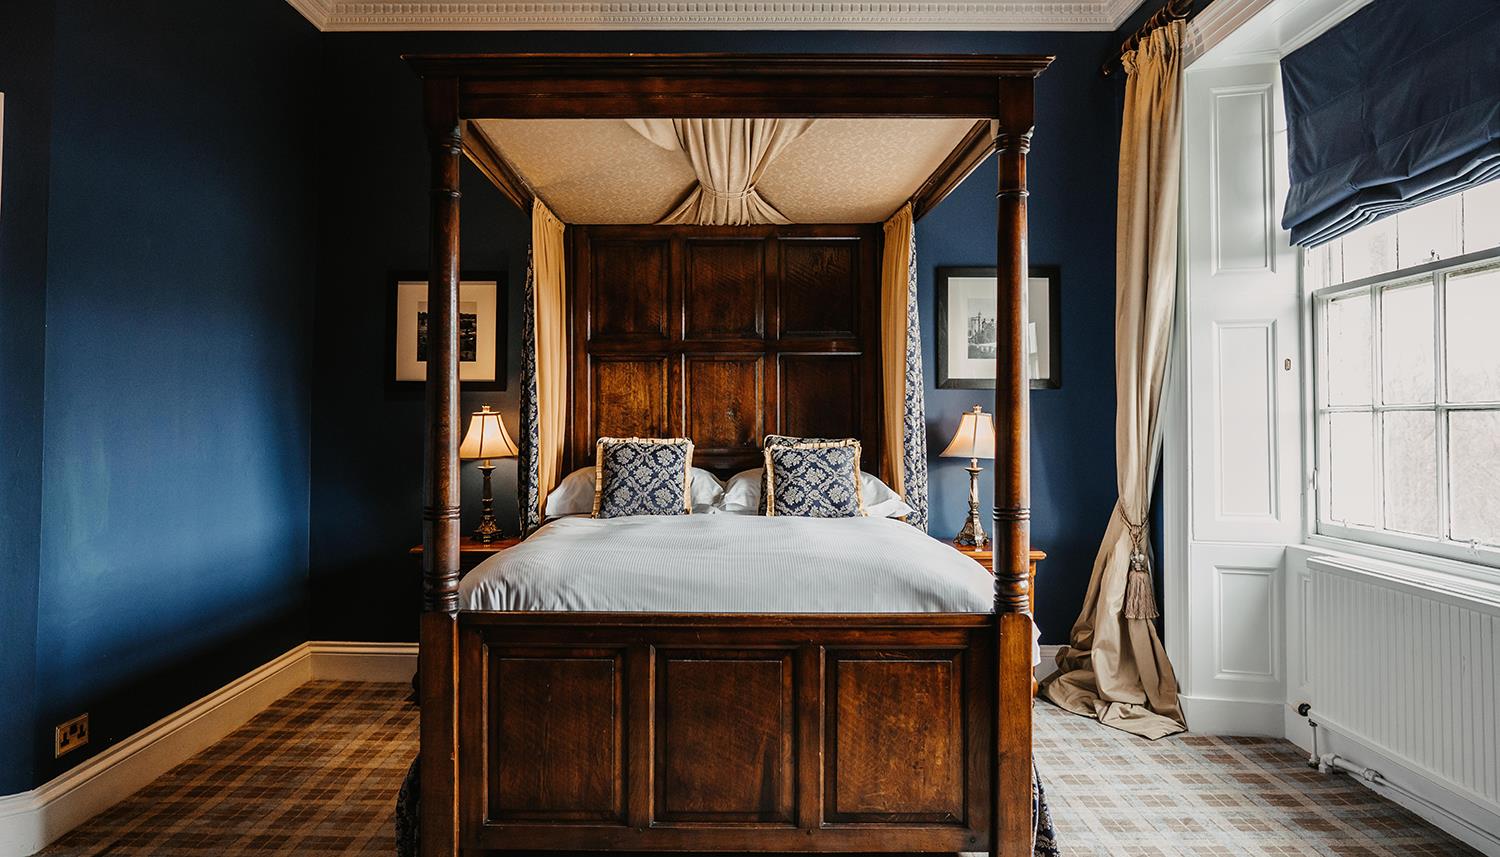 Four poster bed in our castle suite. Photo credit: Willow & Wilde.